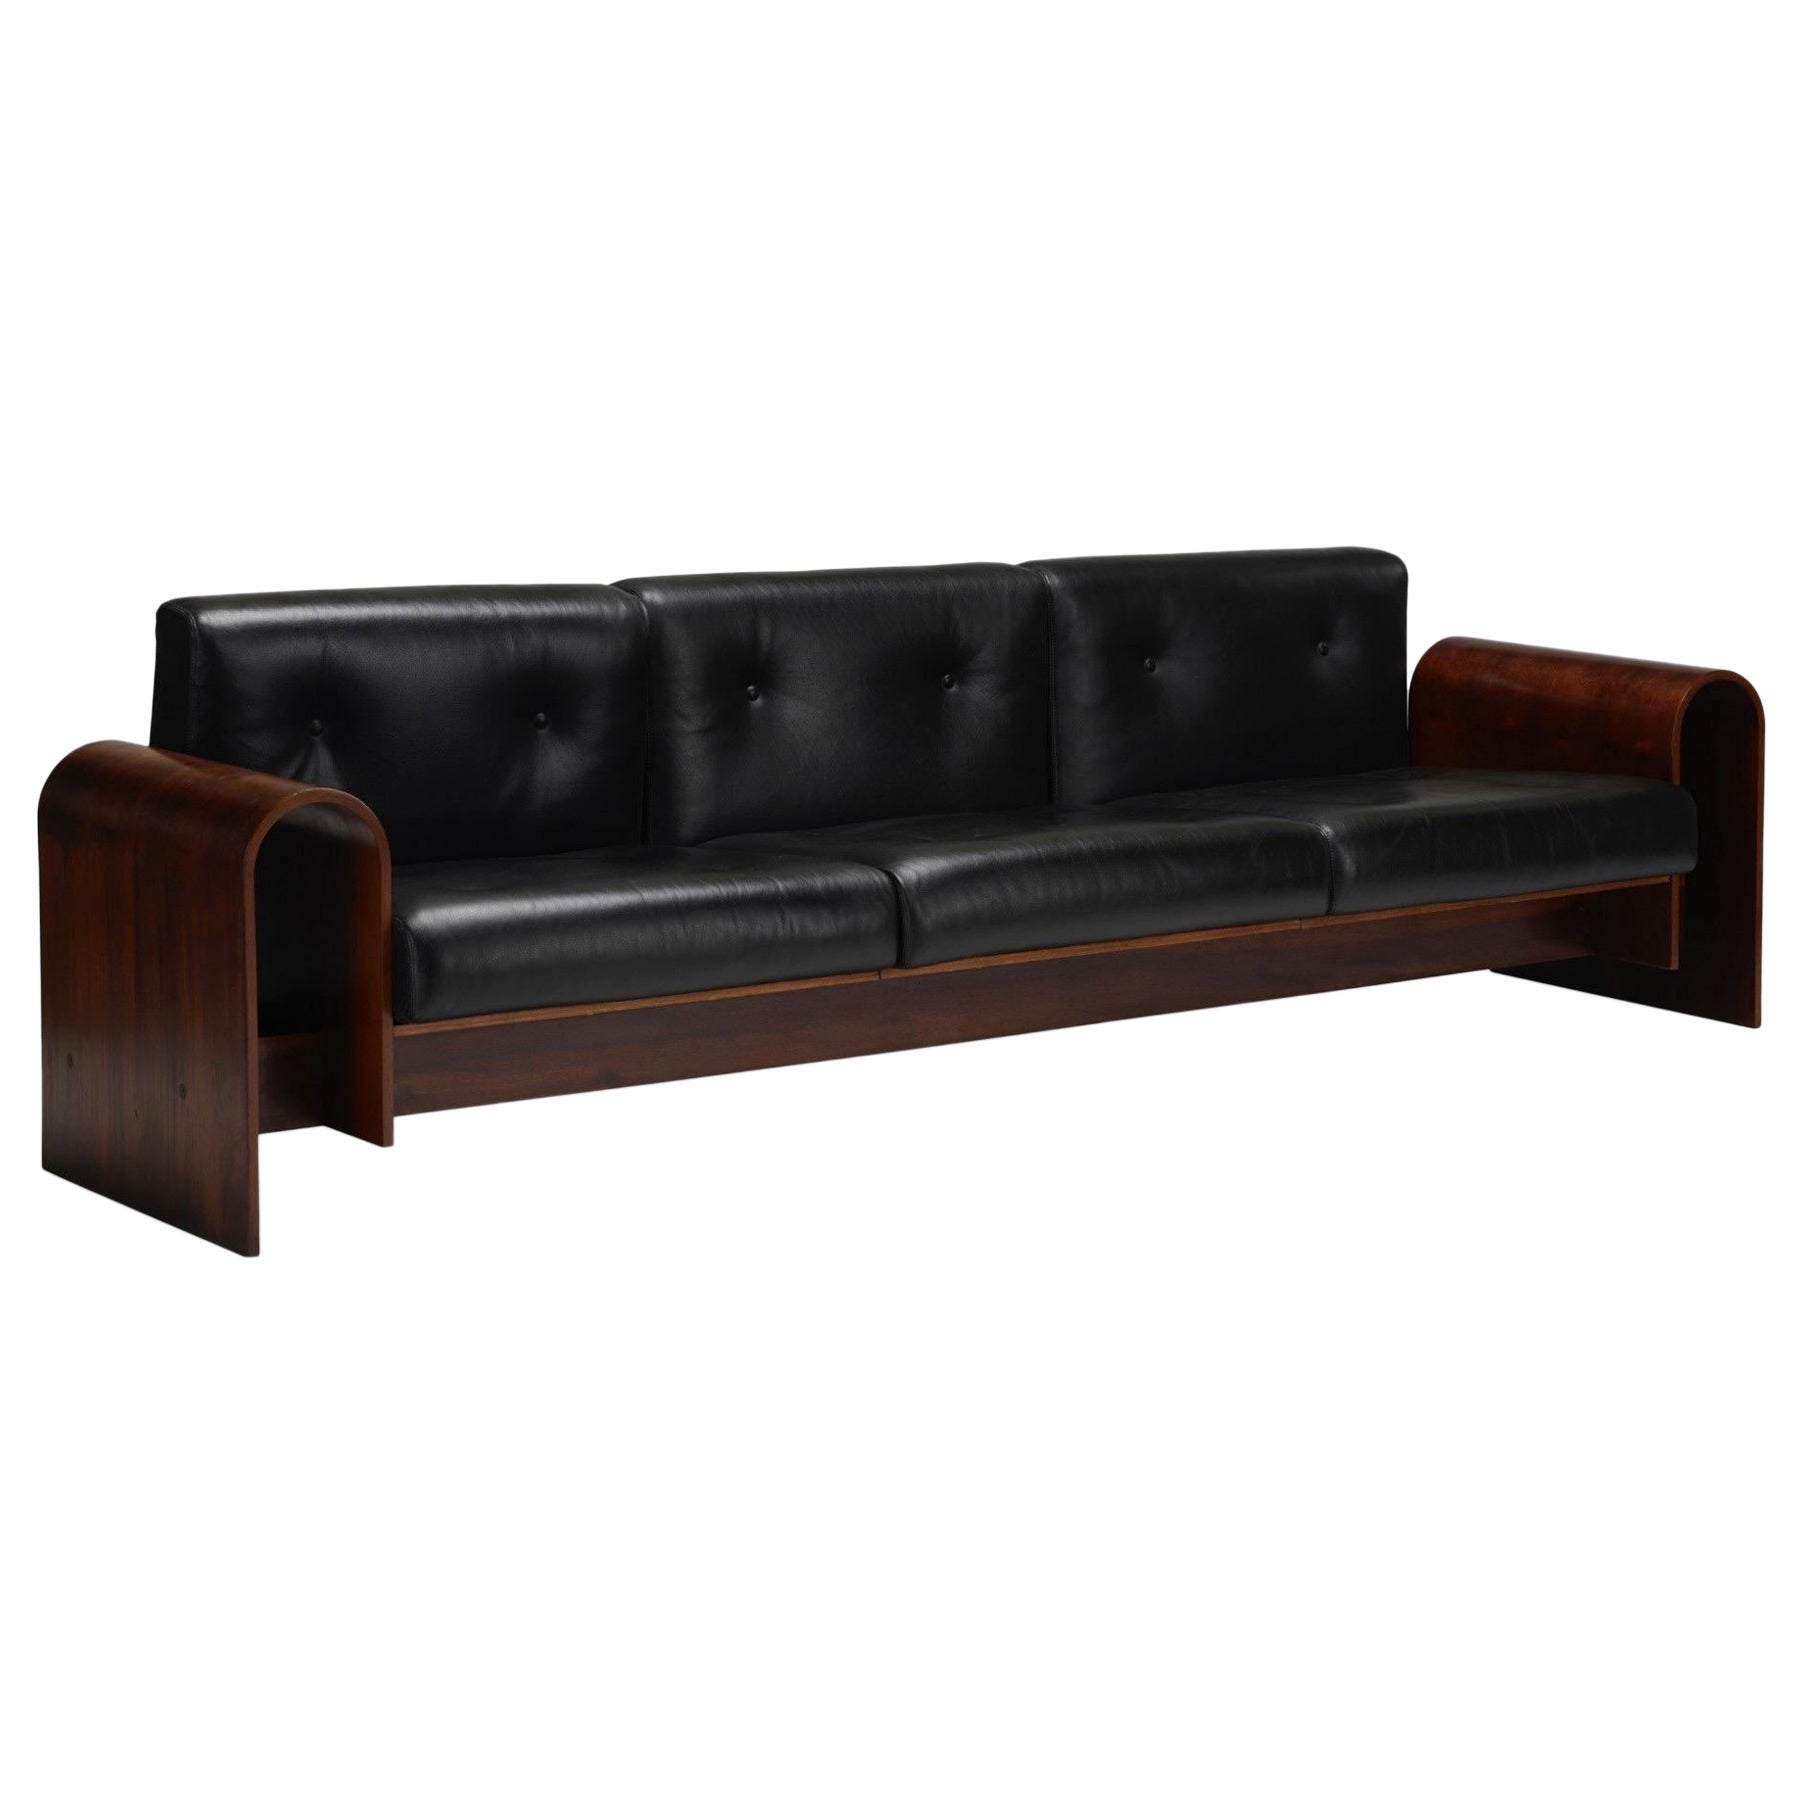 Oscar Niemeyer Exceptional Sofa in Rosewood and Leather, Hotel SESC, Brazil 1990 For Sale